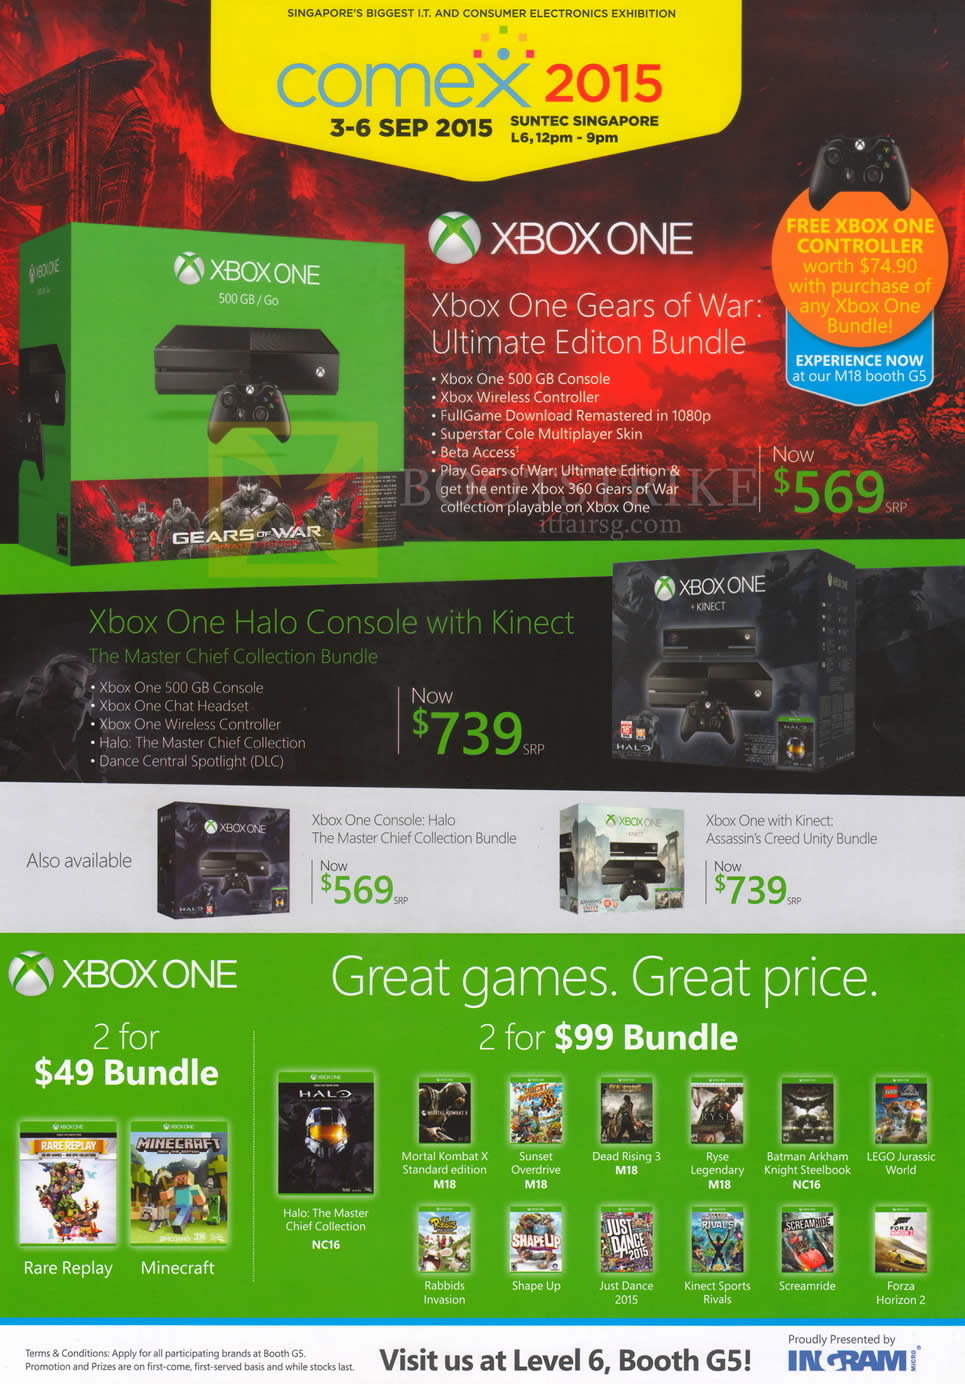 COMEX 2015 price list image brochure of Microsoft Xbox One Gears Of War Ultimate Edition Bundle, Halo Console With Kinect, Console Halo The Master Chef Collection Bundle, Kinect Assassins Creed Unity Bundle, Games